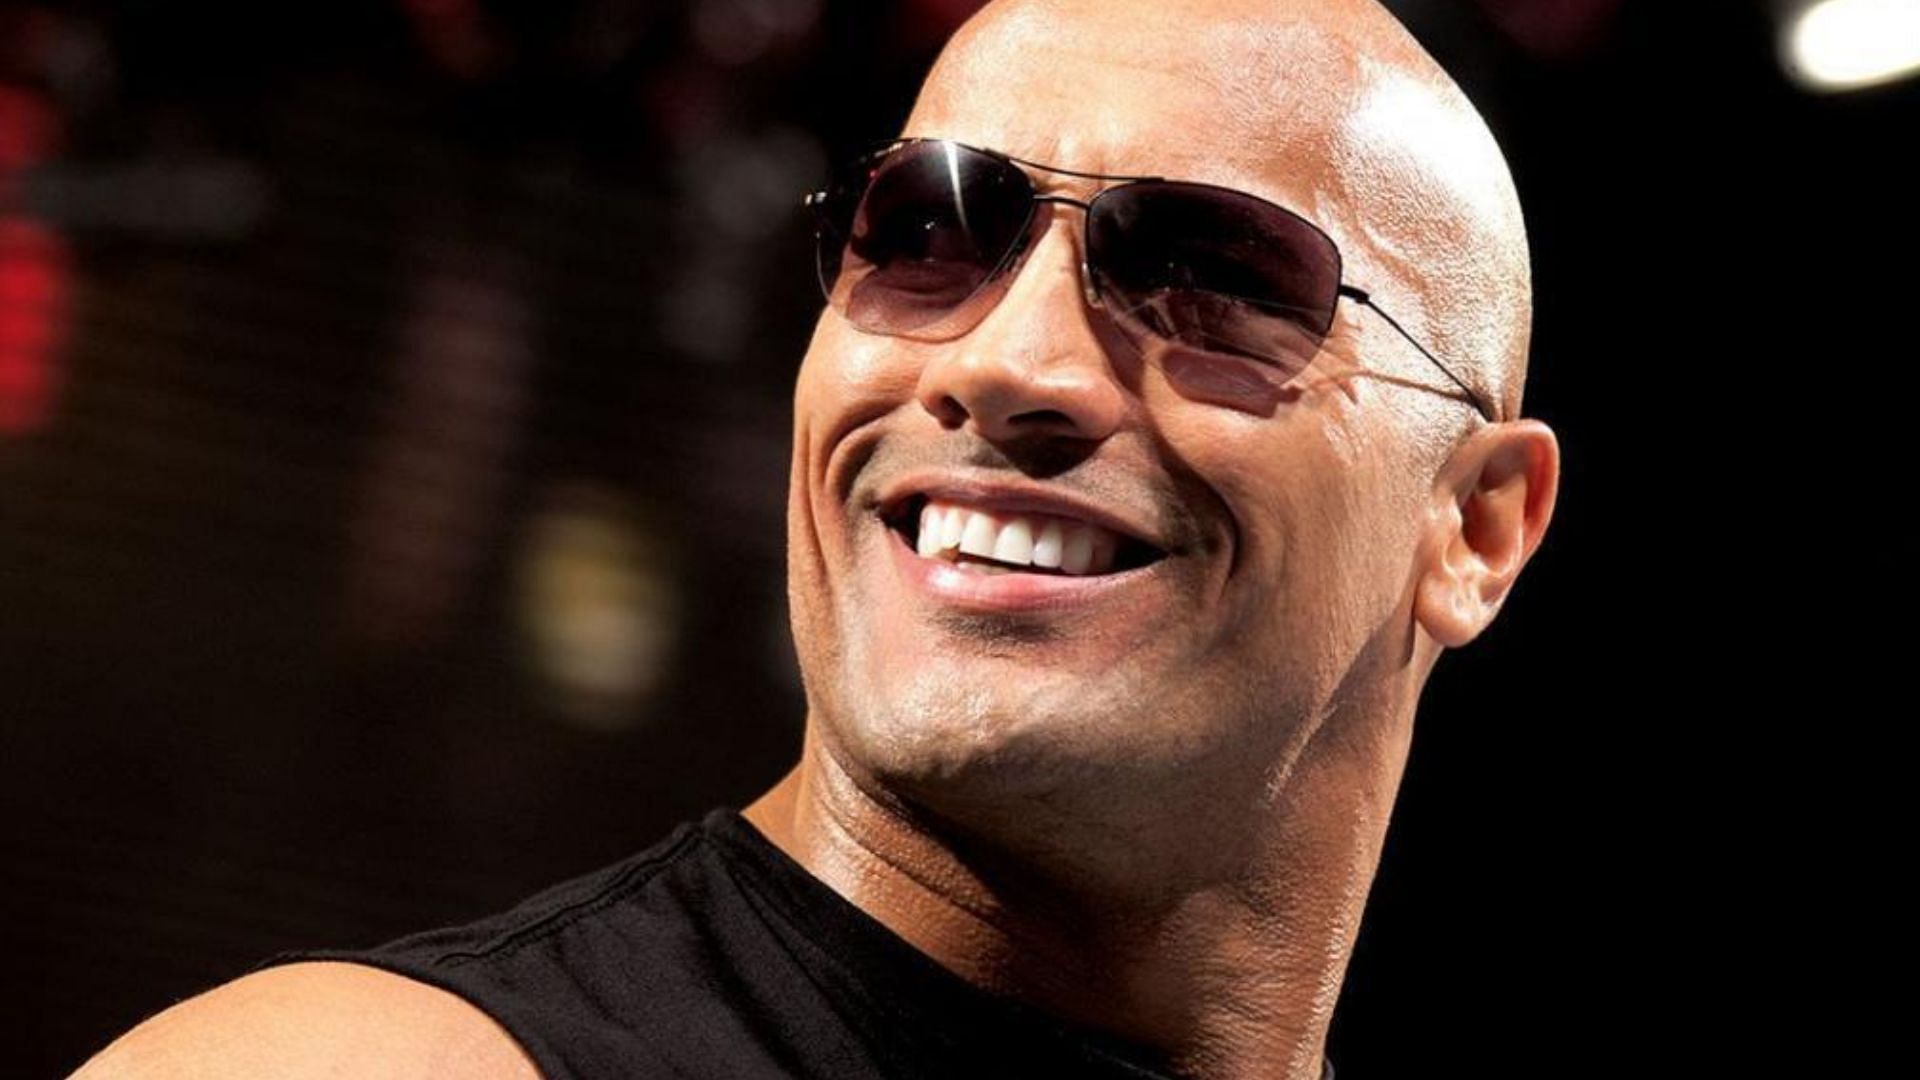 Former WWE Champion The Rock has not wrestled since 2016